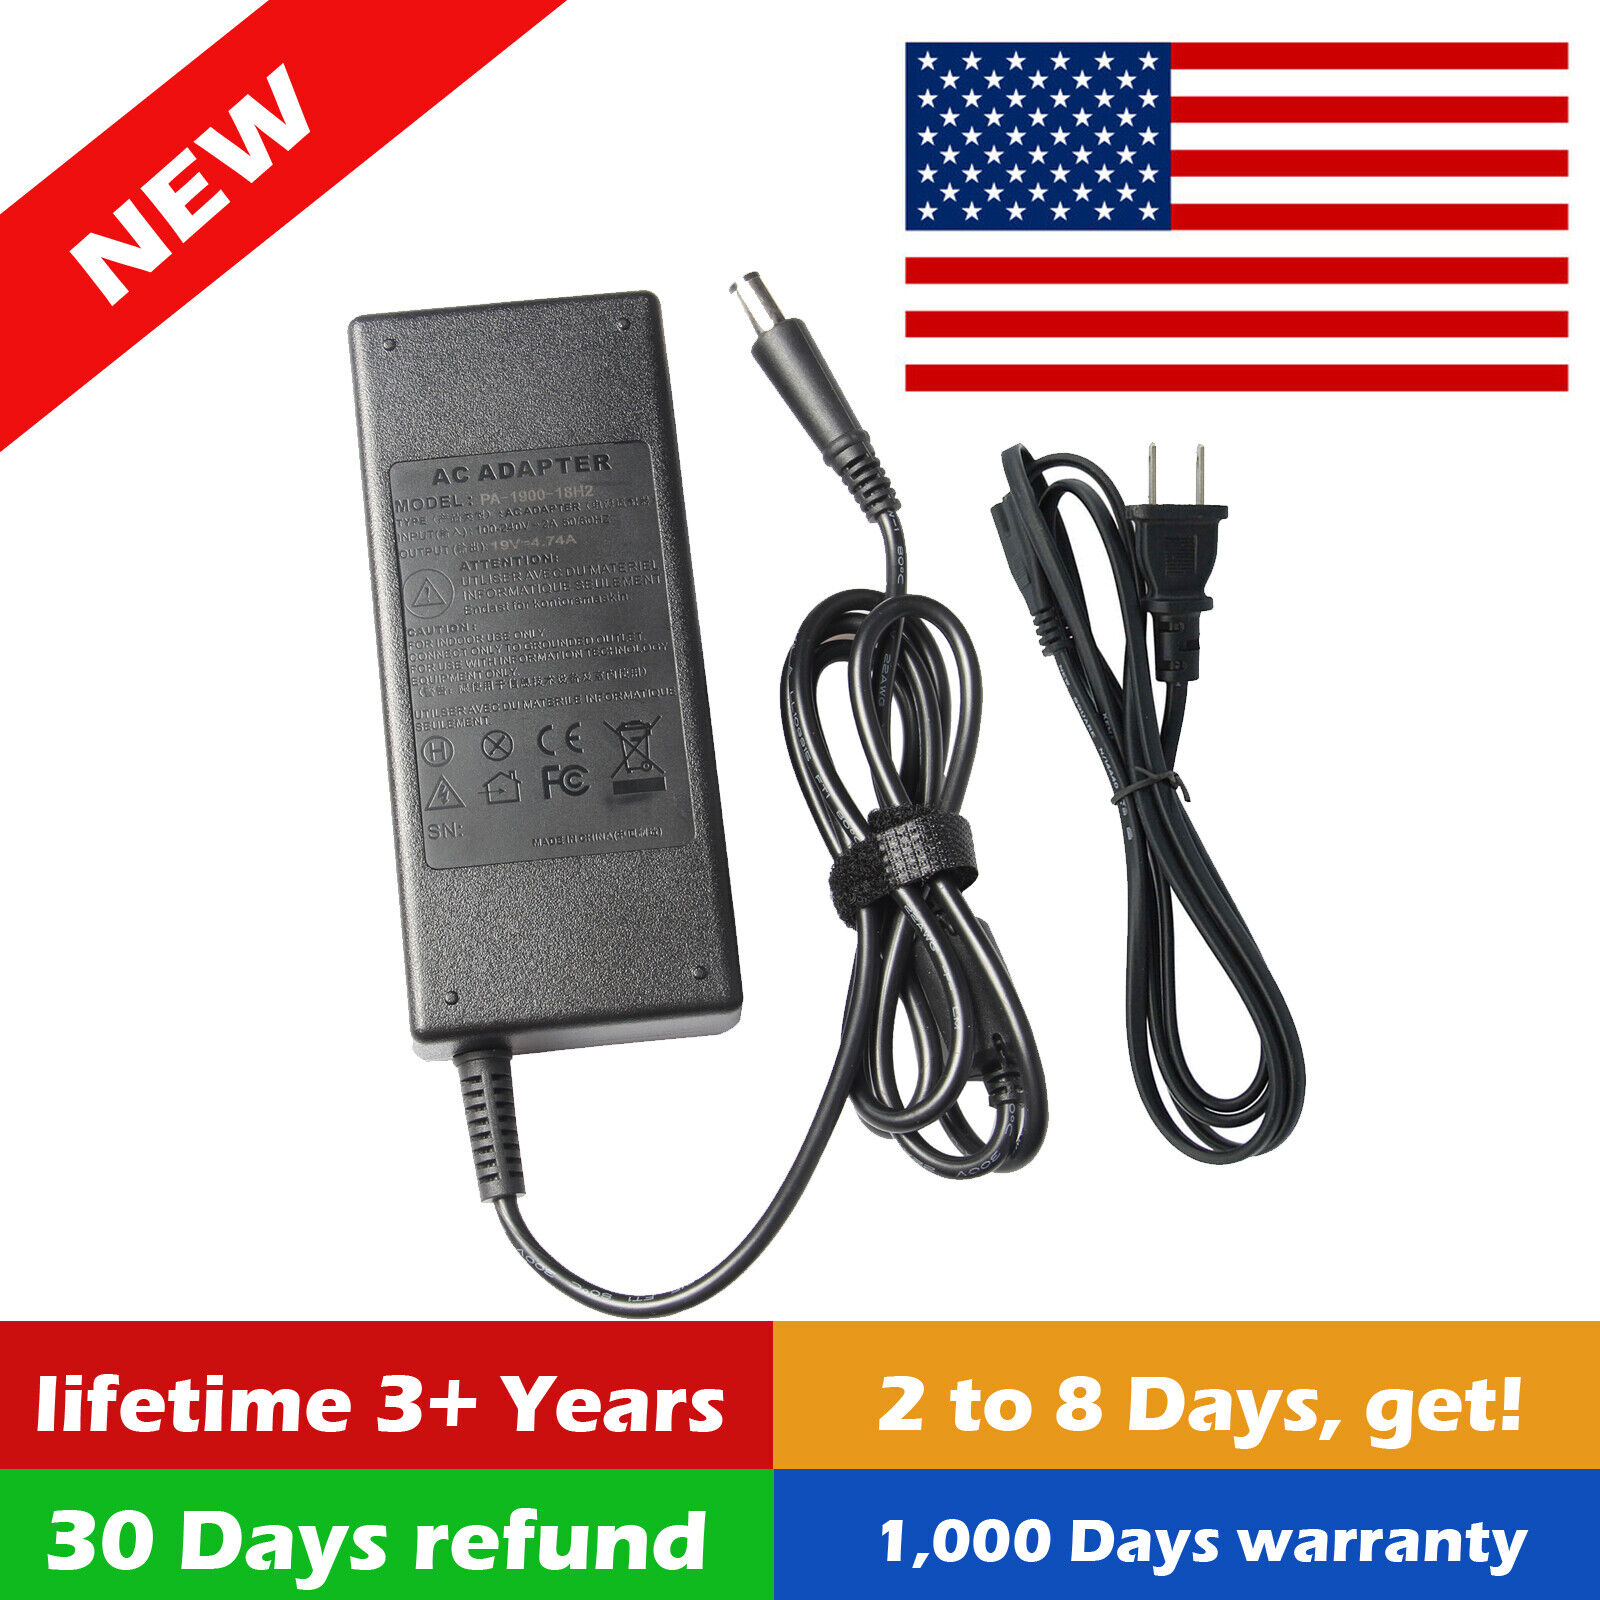 AC Adapter For HP Pavilion 23-b010 23-b012 All-in-One Desktop Power Supply Cord